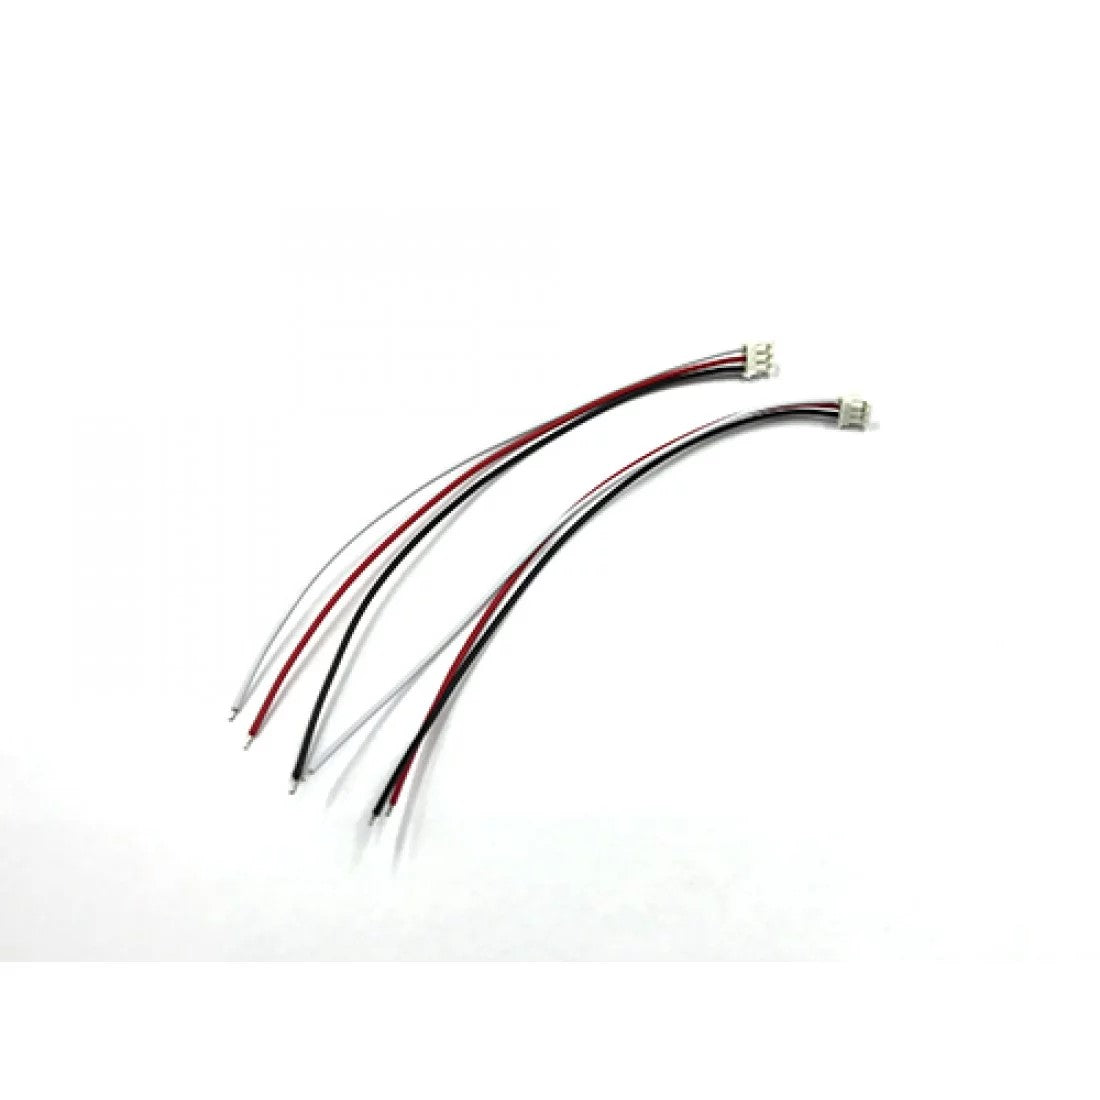 GL-Racing Wires With JST Plugs (x2)